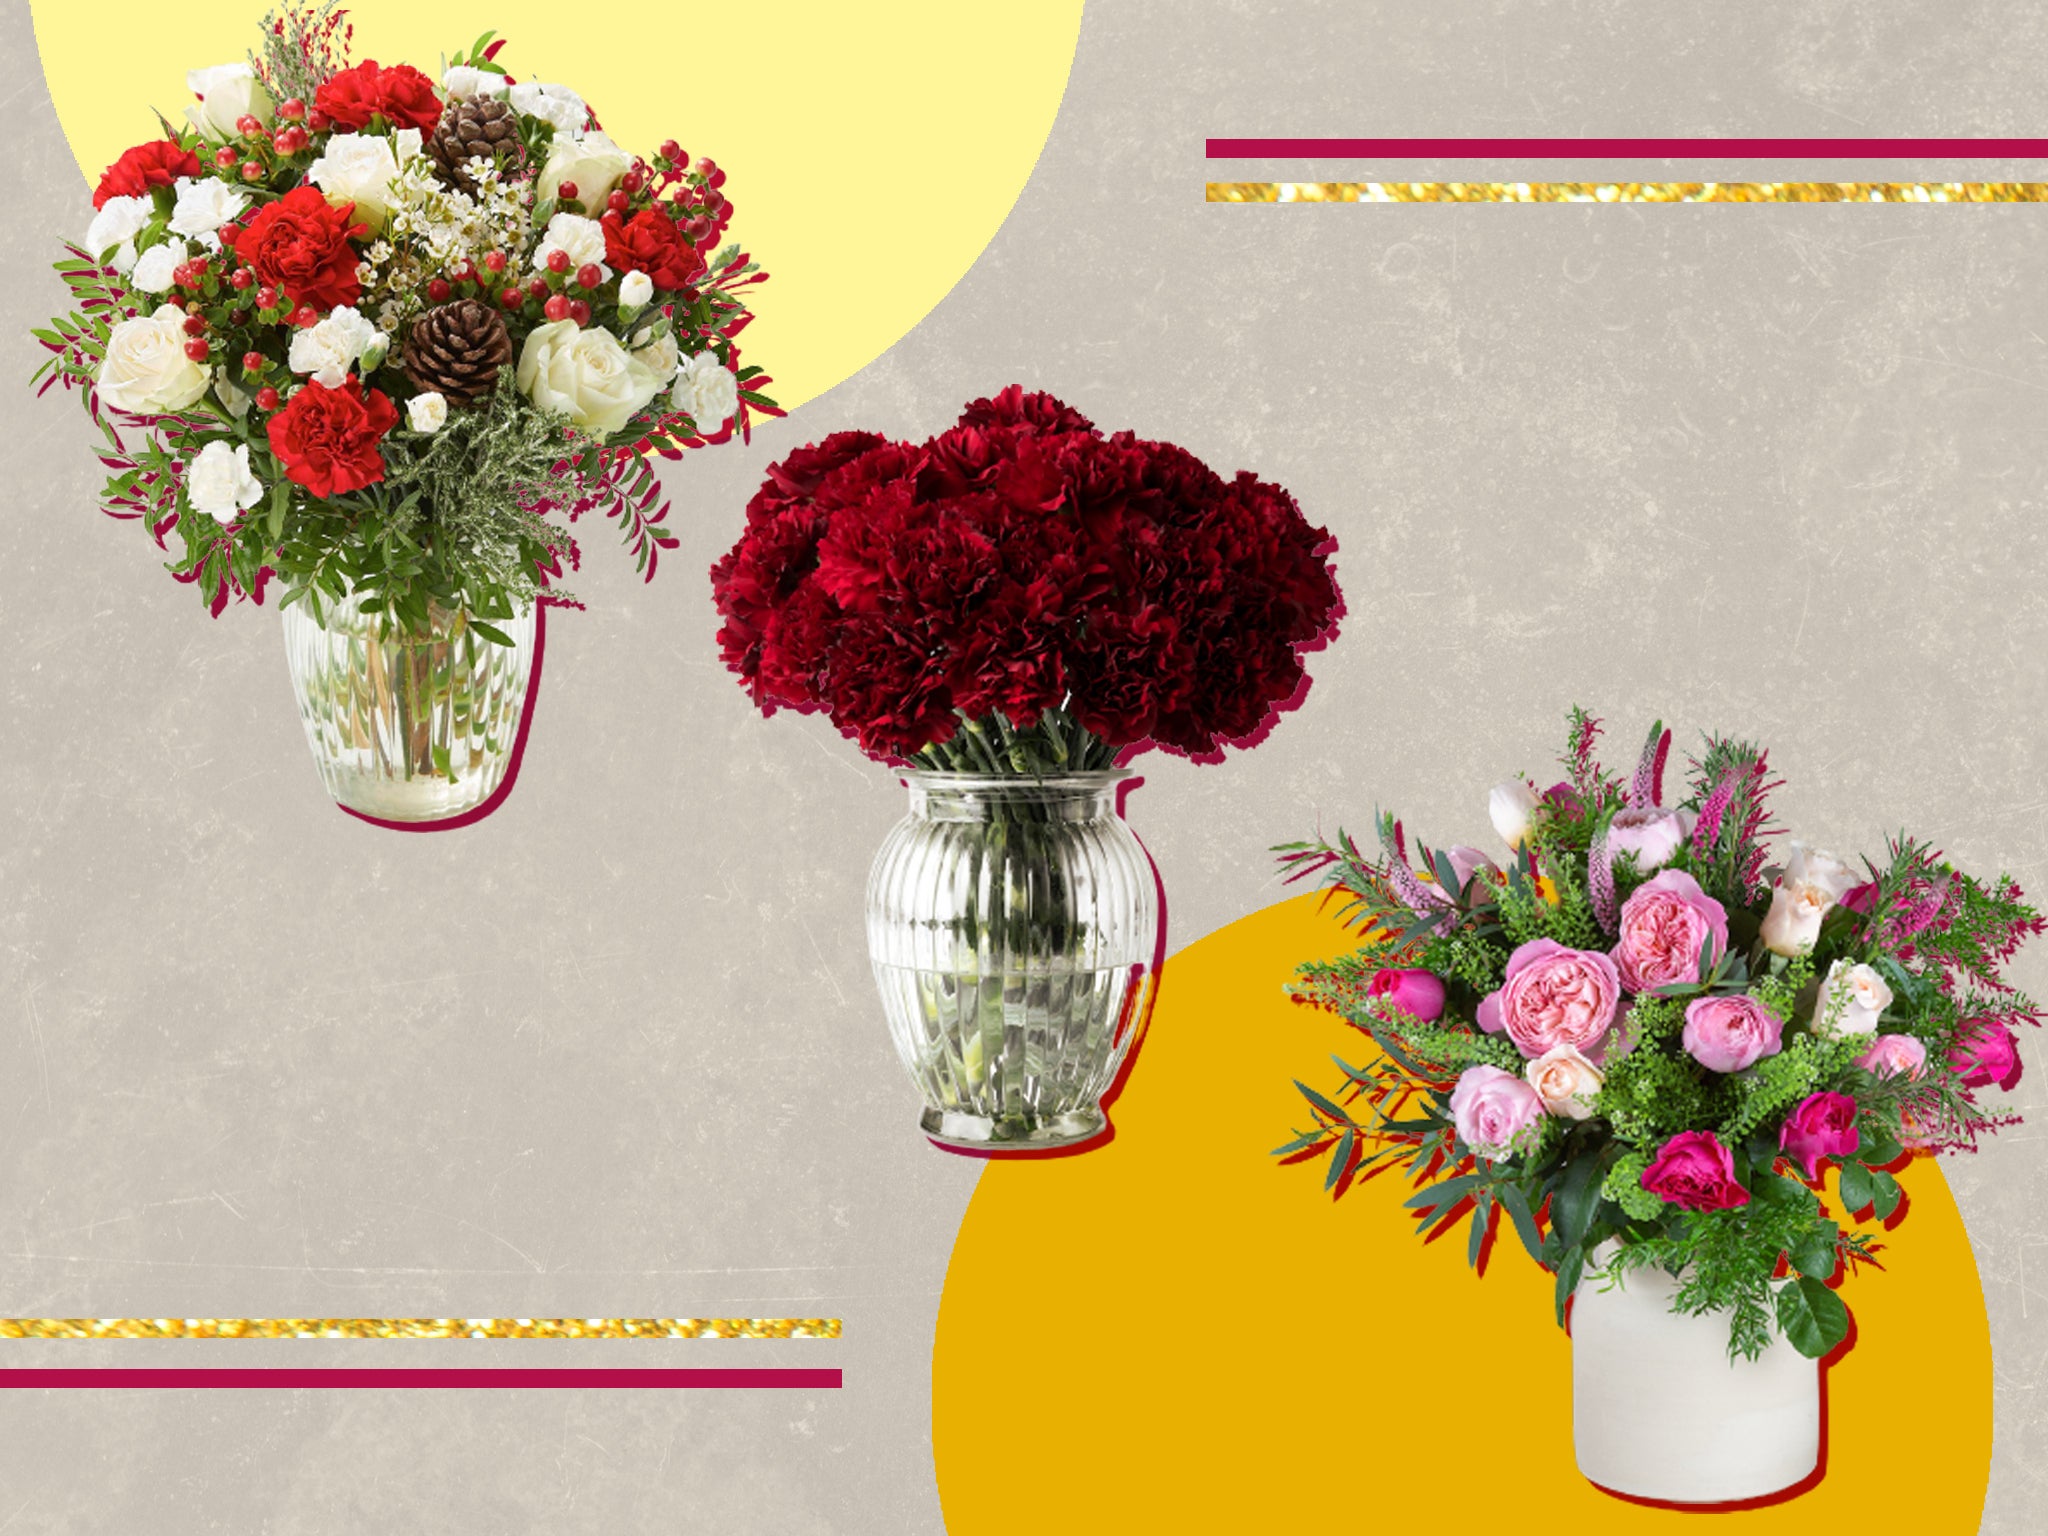 These hand-tied bunches can be put straight into a vase without any fuss